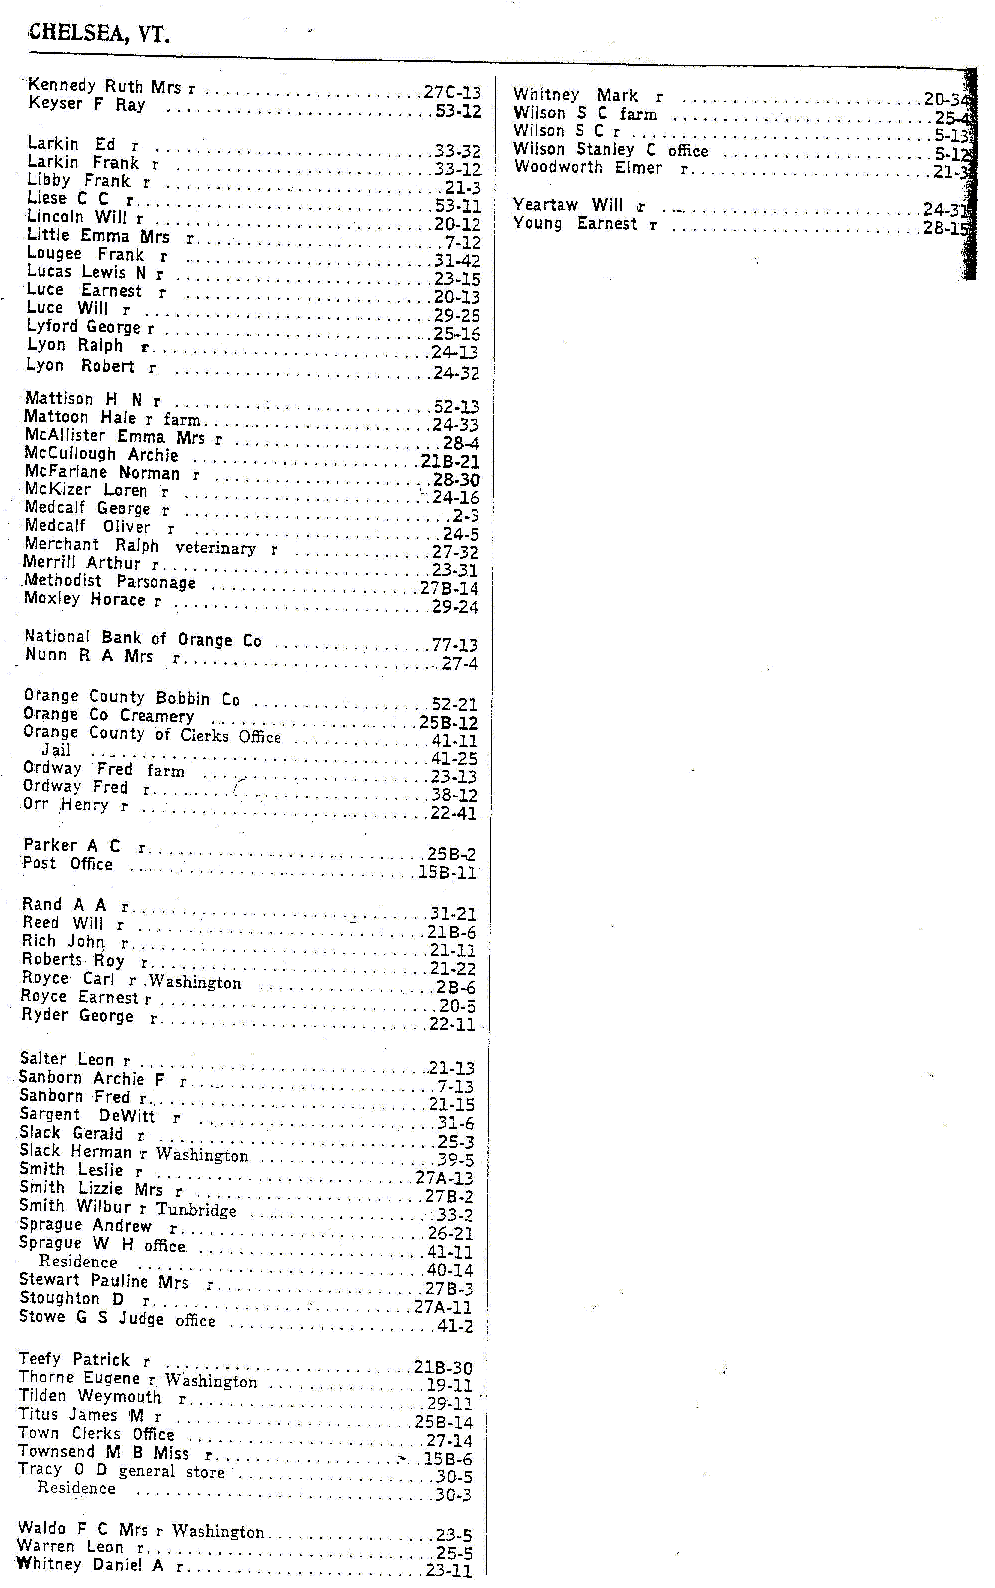 1928 Chelsea Vt Telephone Book - Page 2